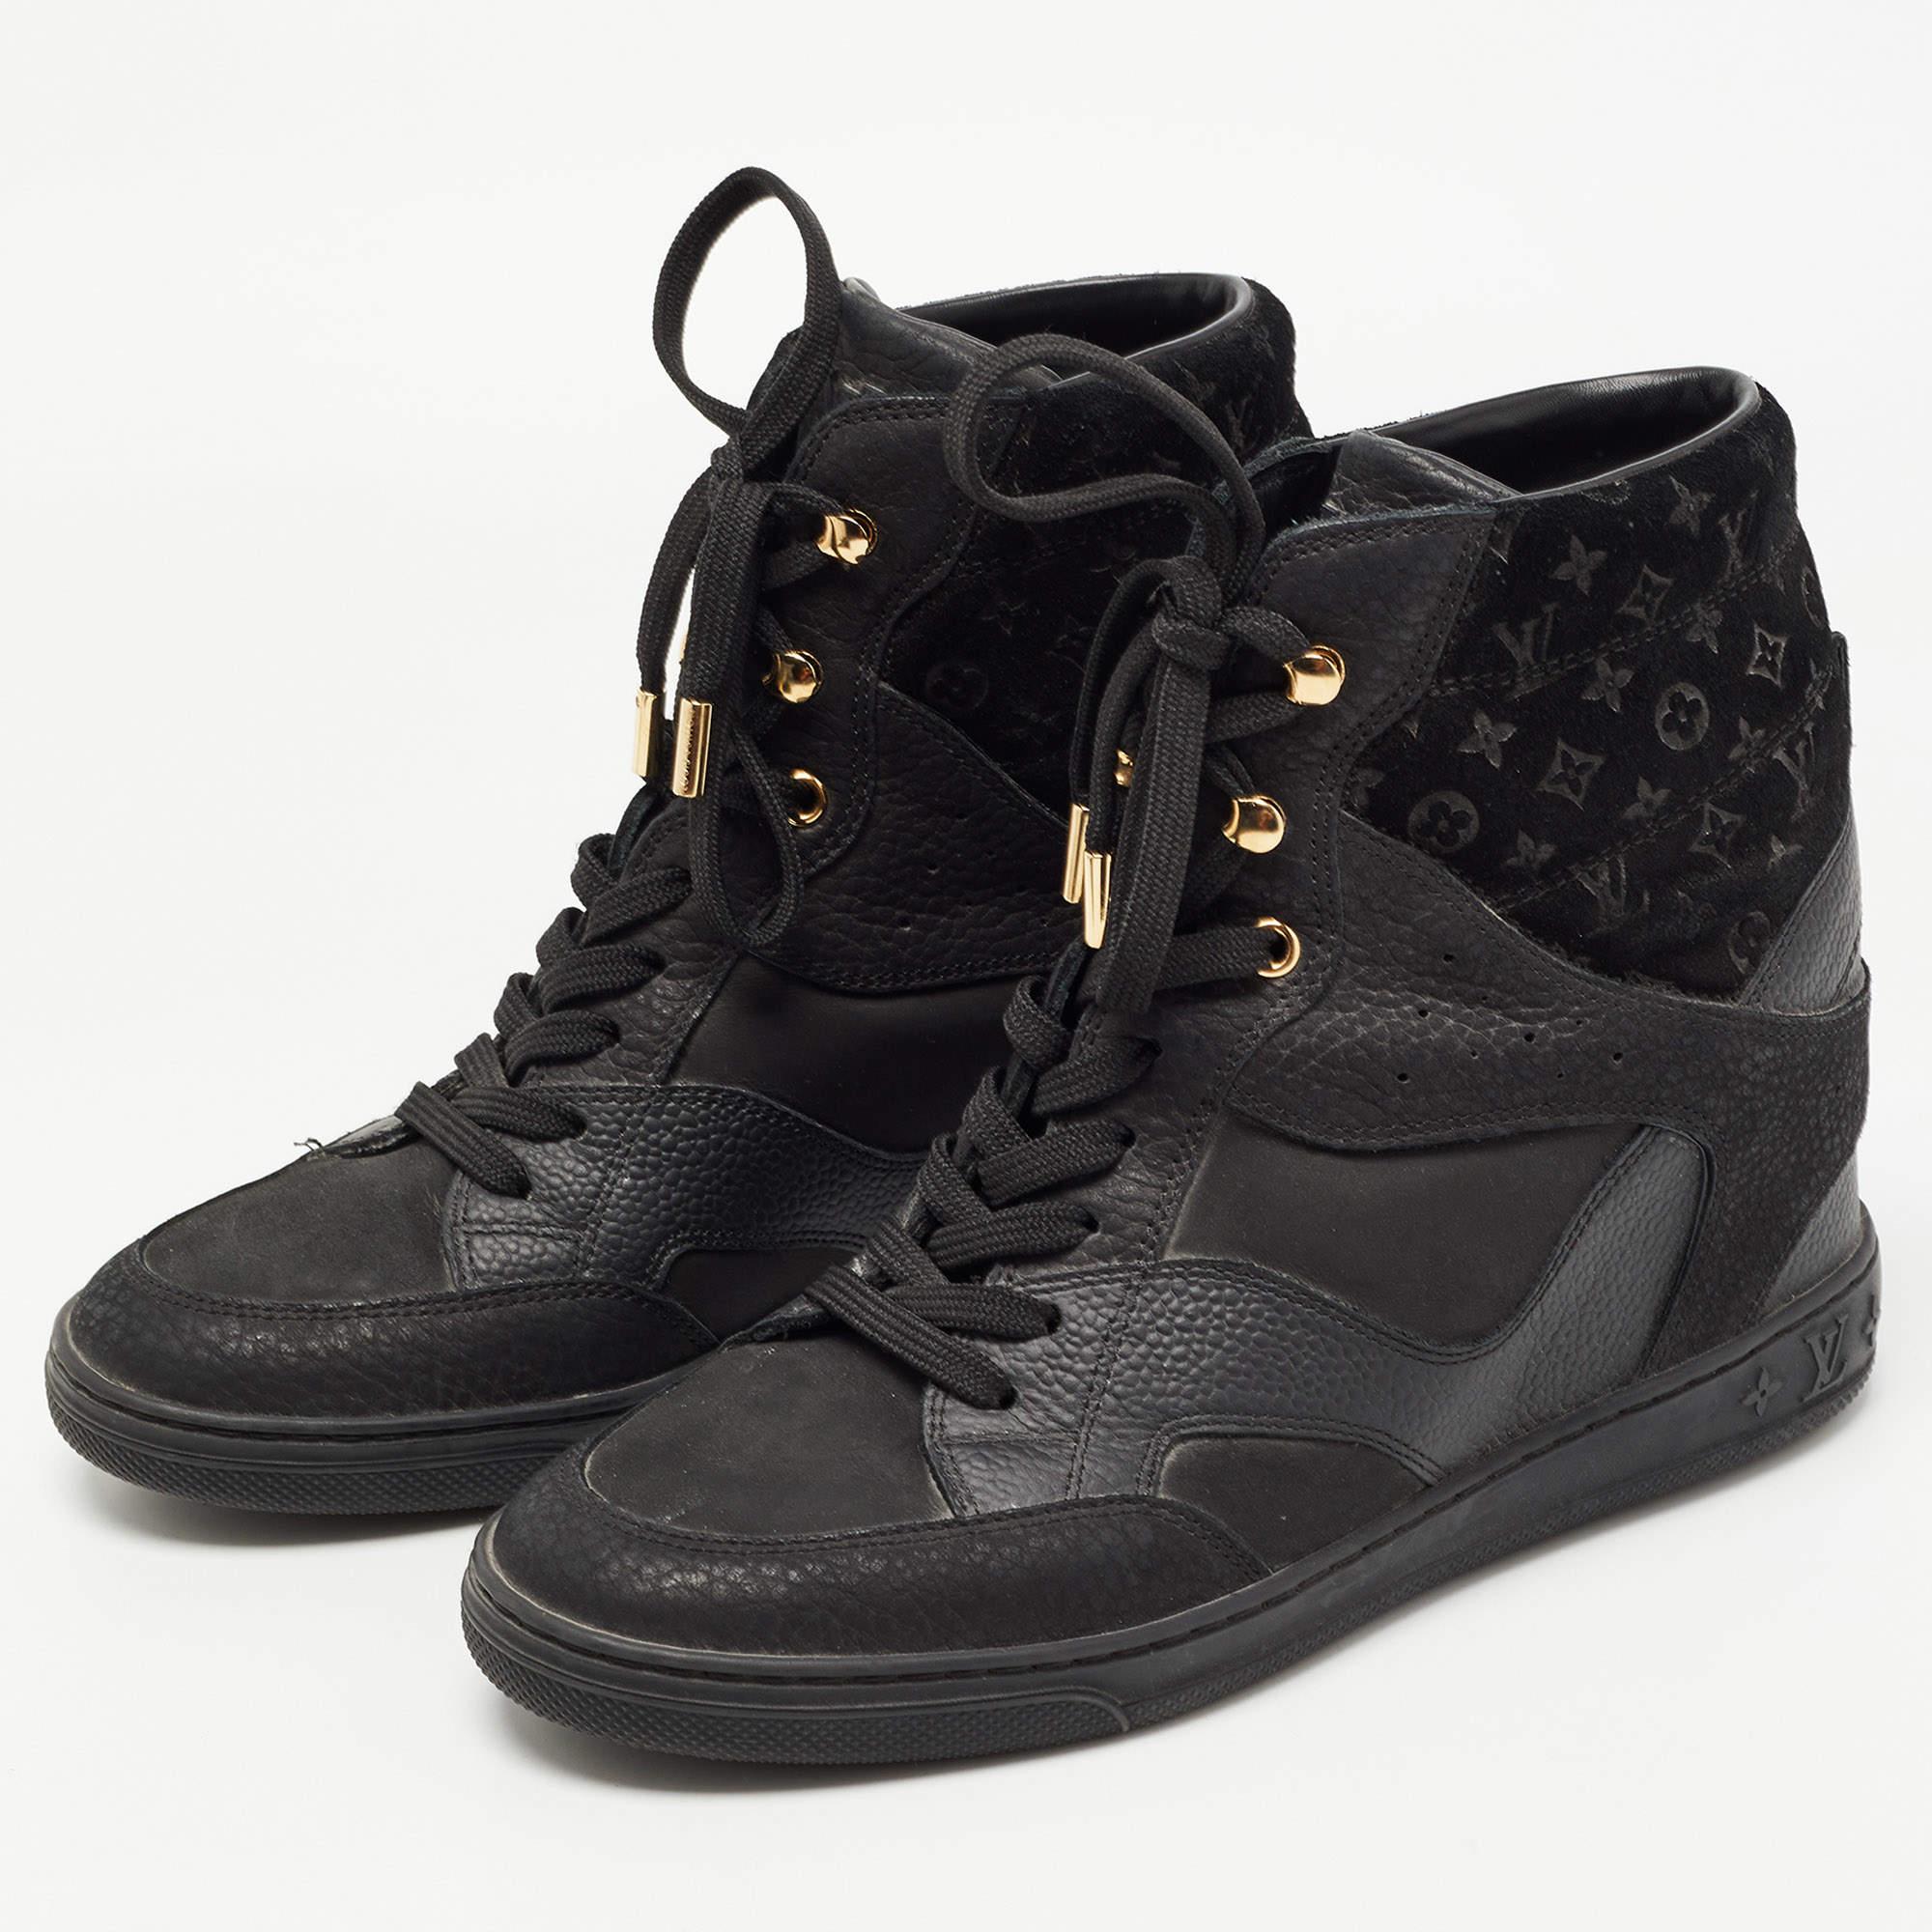 Louis Vuitton Black Nubuck Leather and Suede Cliff Sneakers Size 37 3